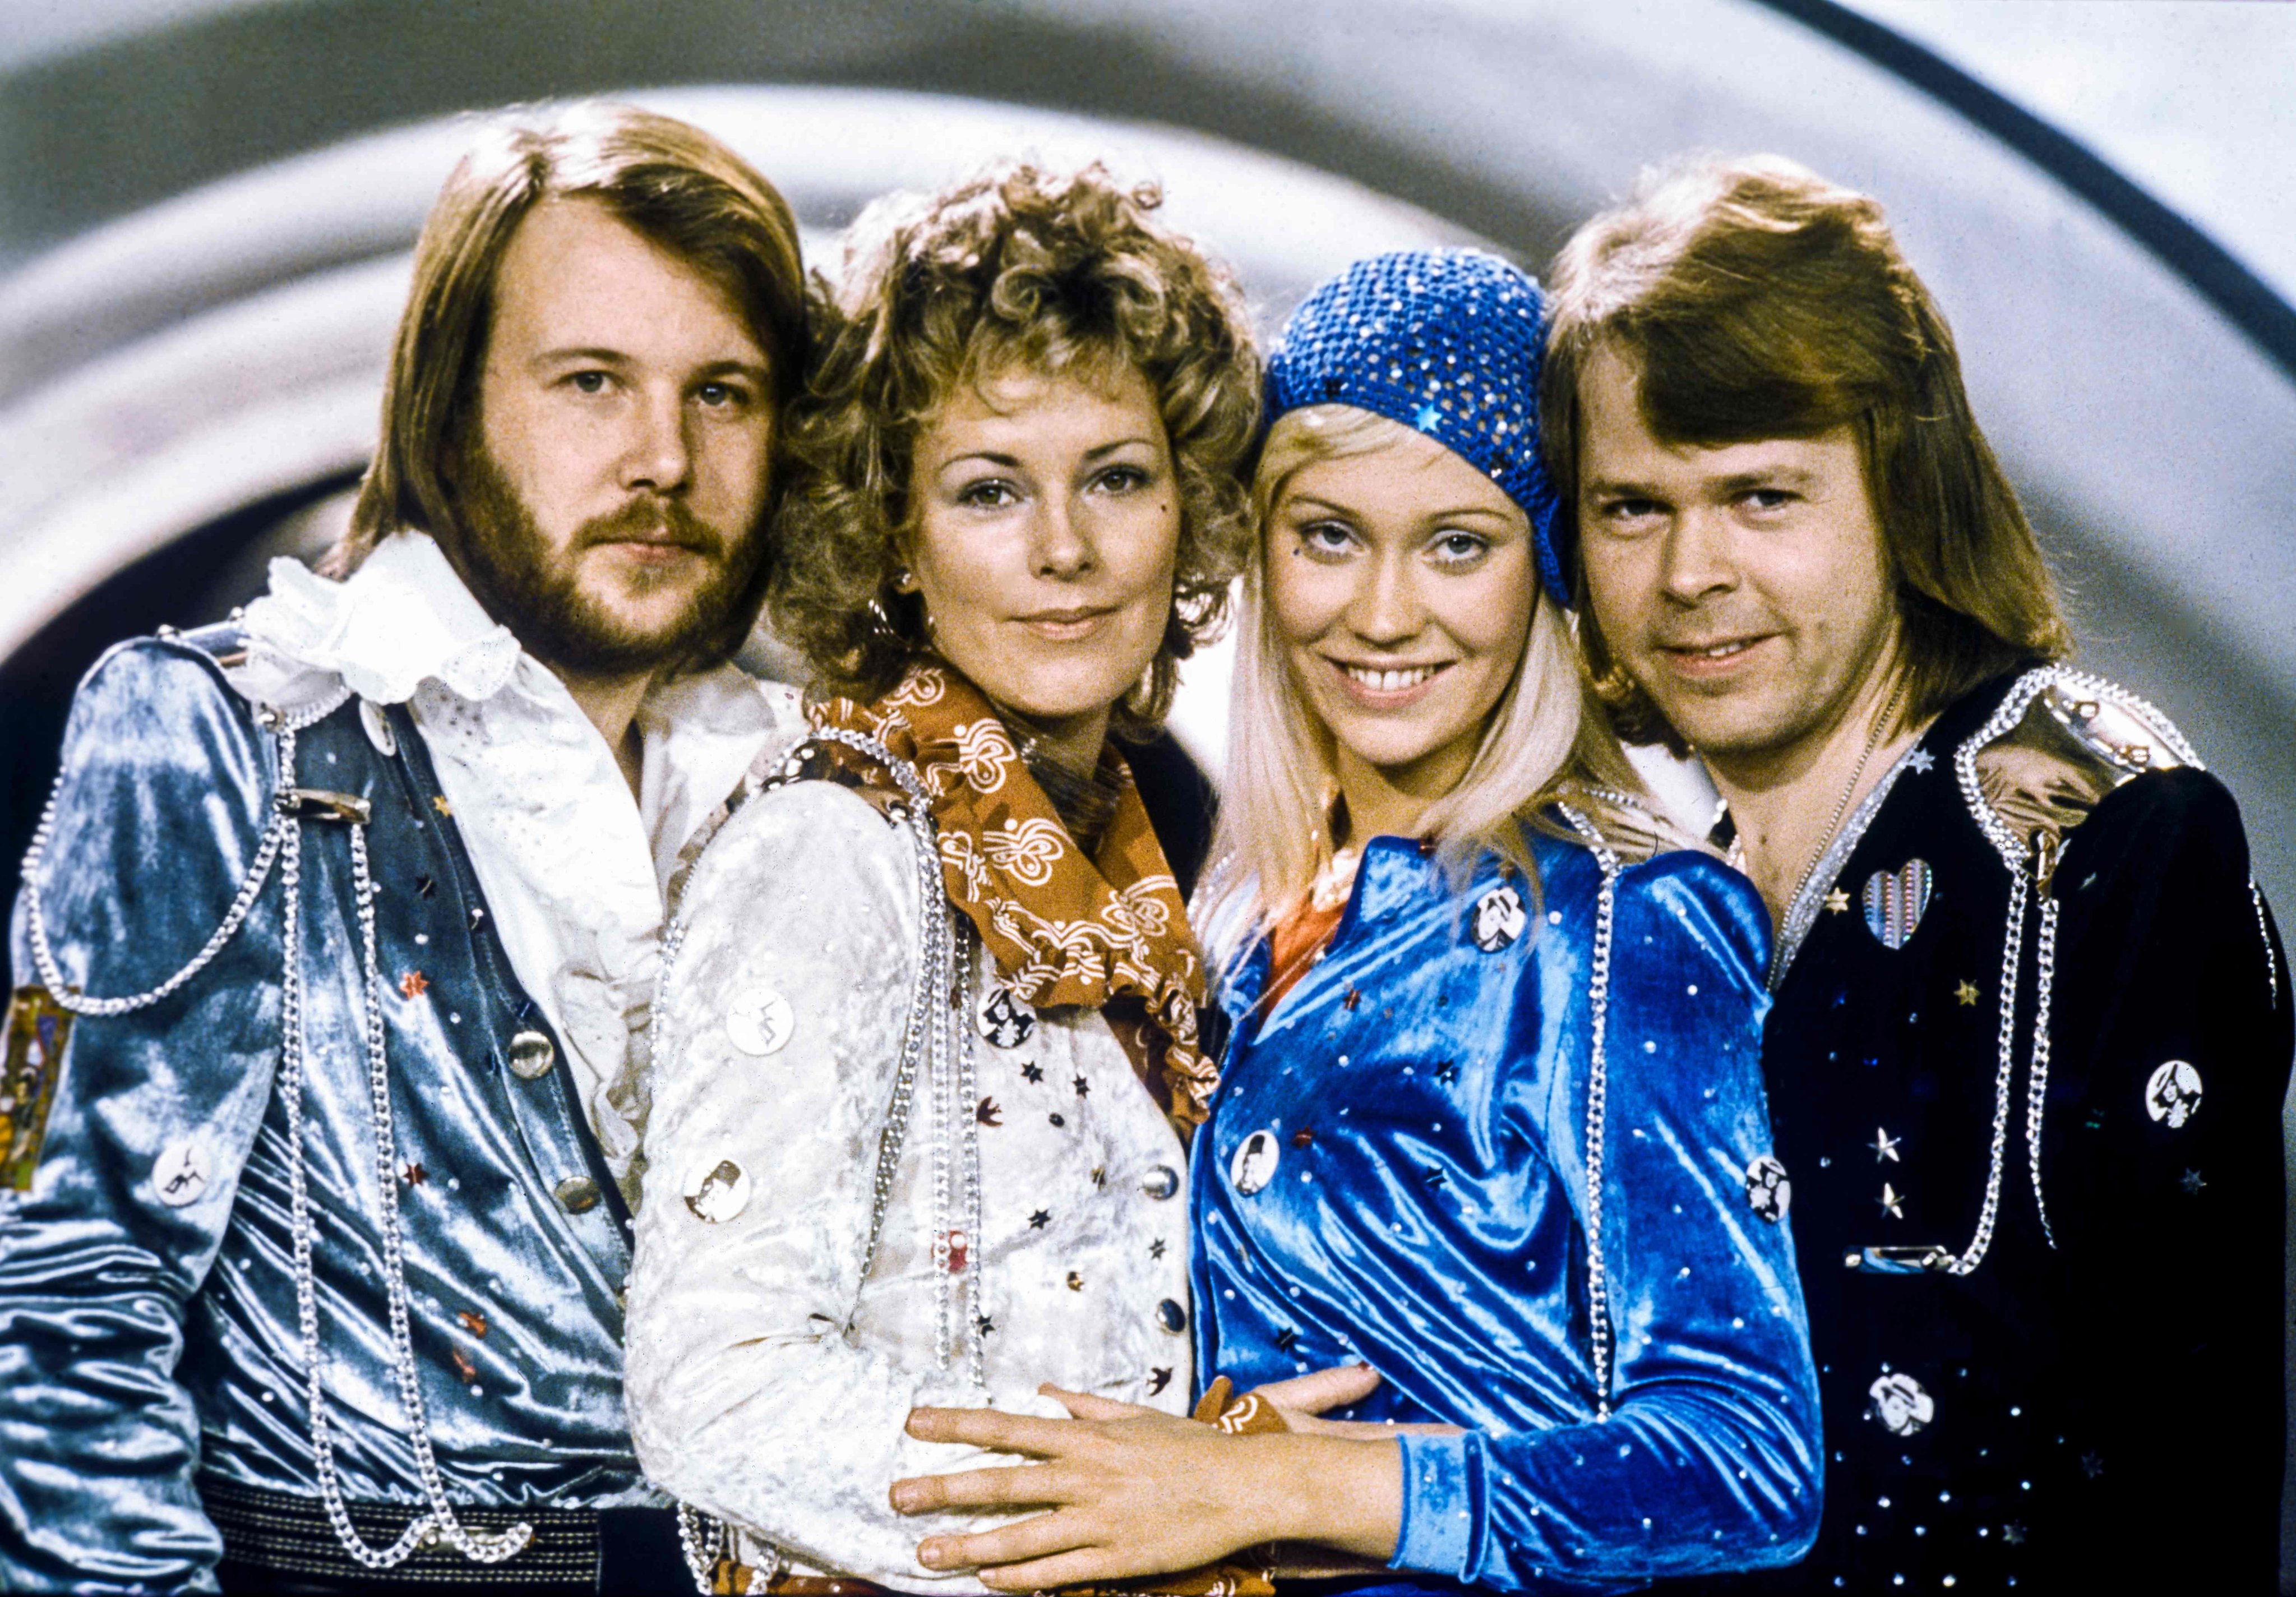 Swedish pop group Abba, left to right, Benny Andersson, Anni-Frid Lyngstad, Agnetha Faltskog and Bjorn Ulvaeus after winning the Eurovision Song Contest in 1974. Photo: AFP